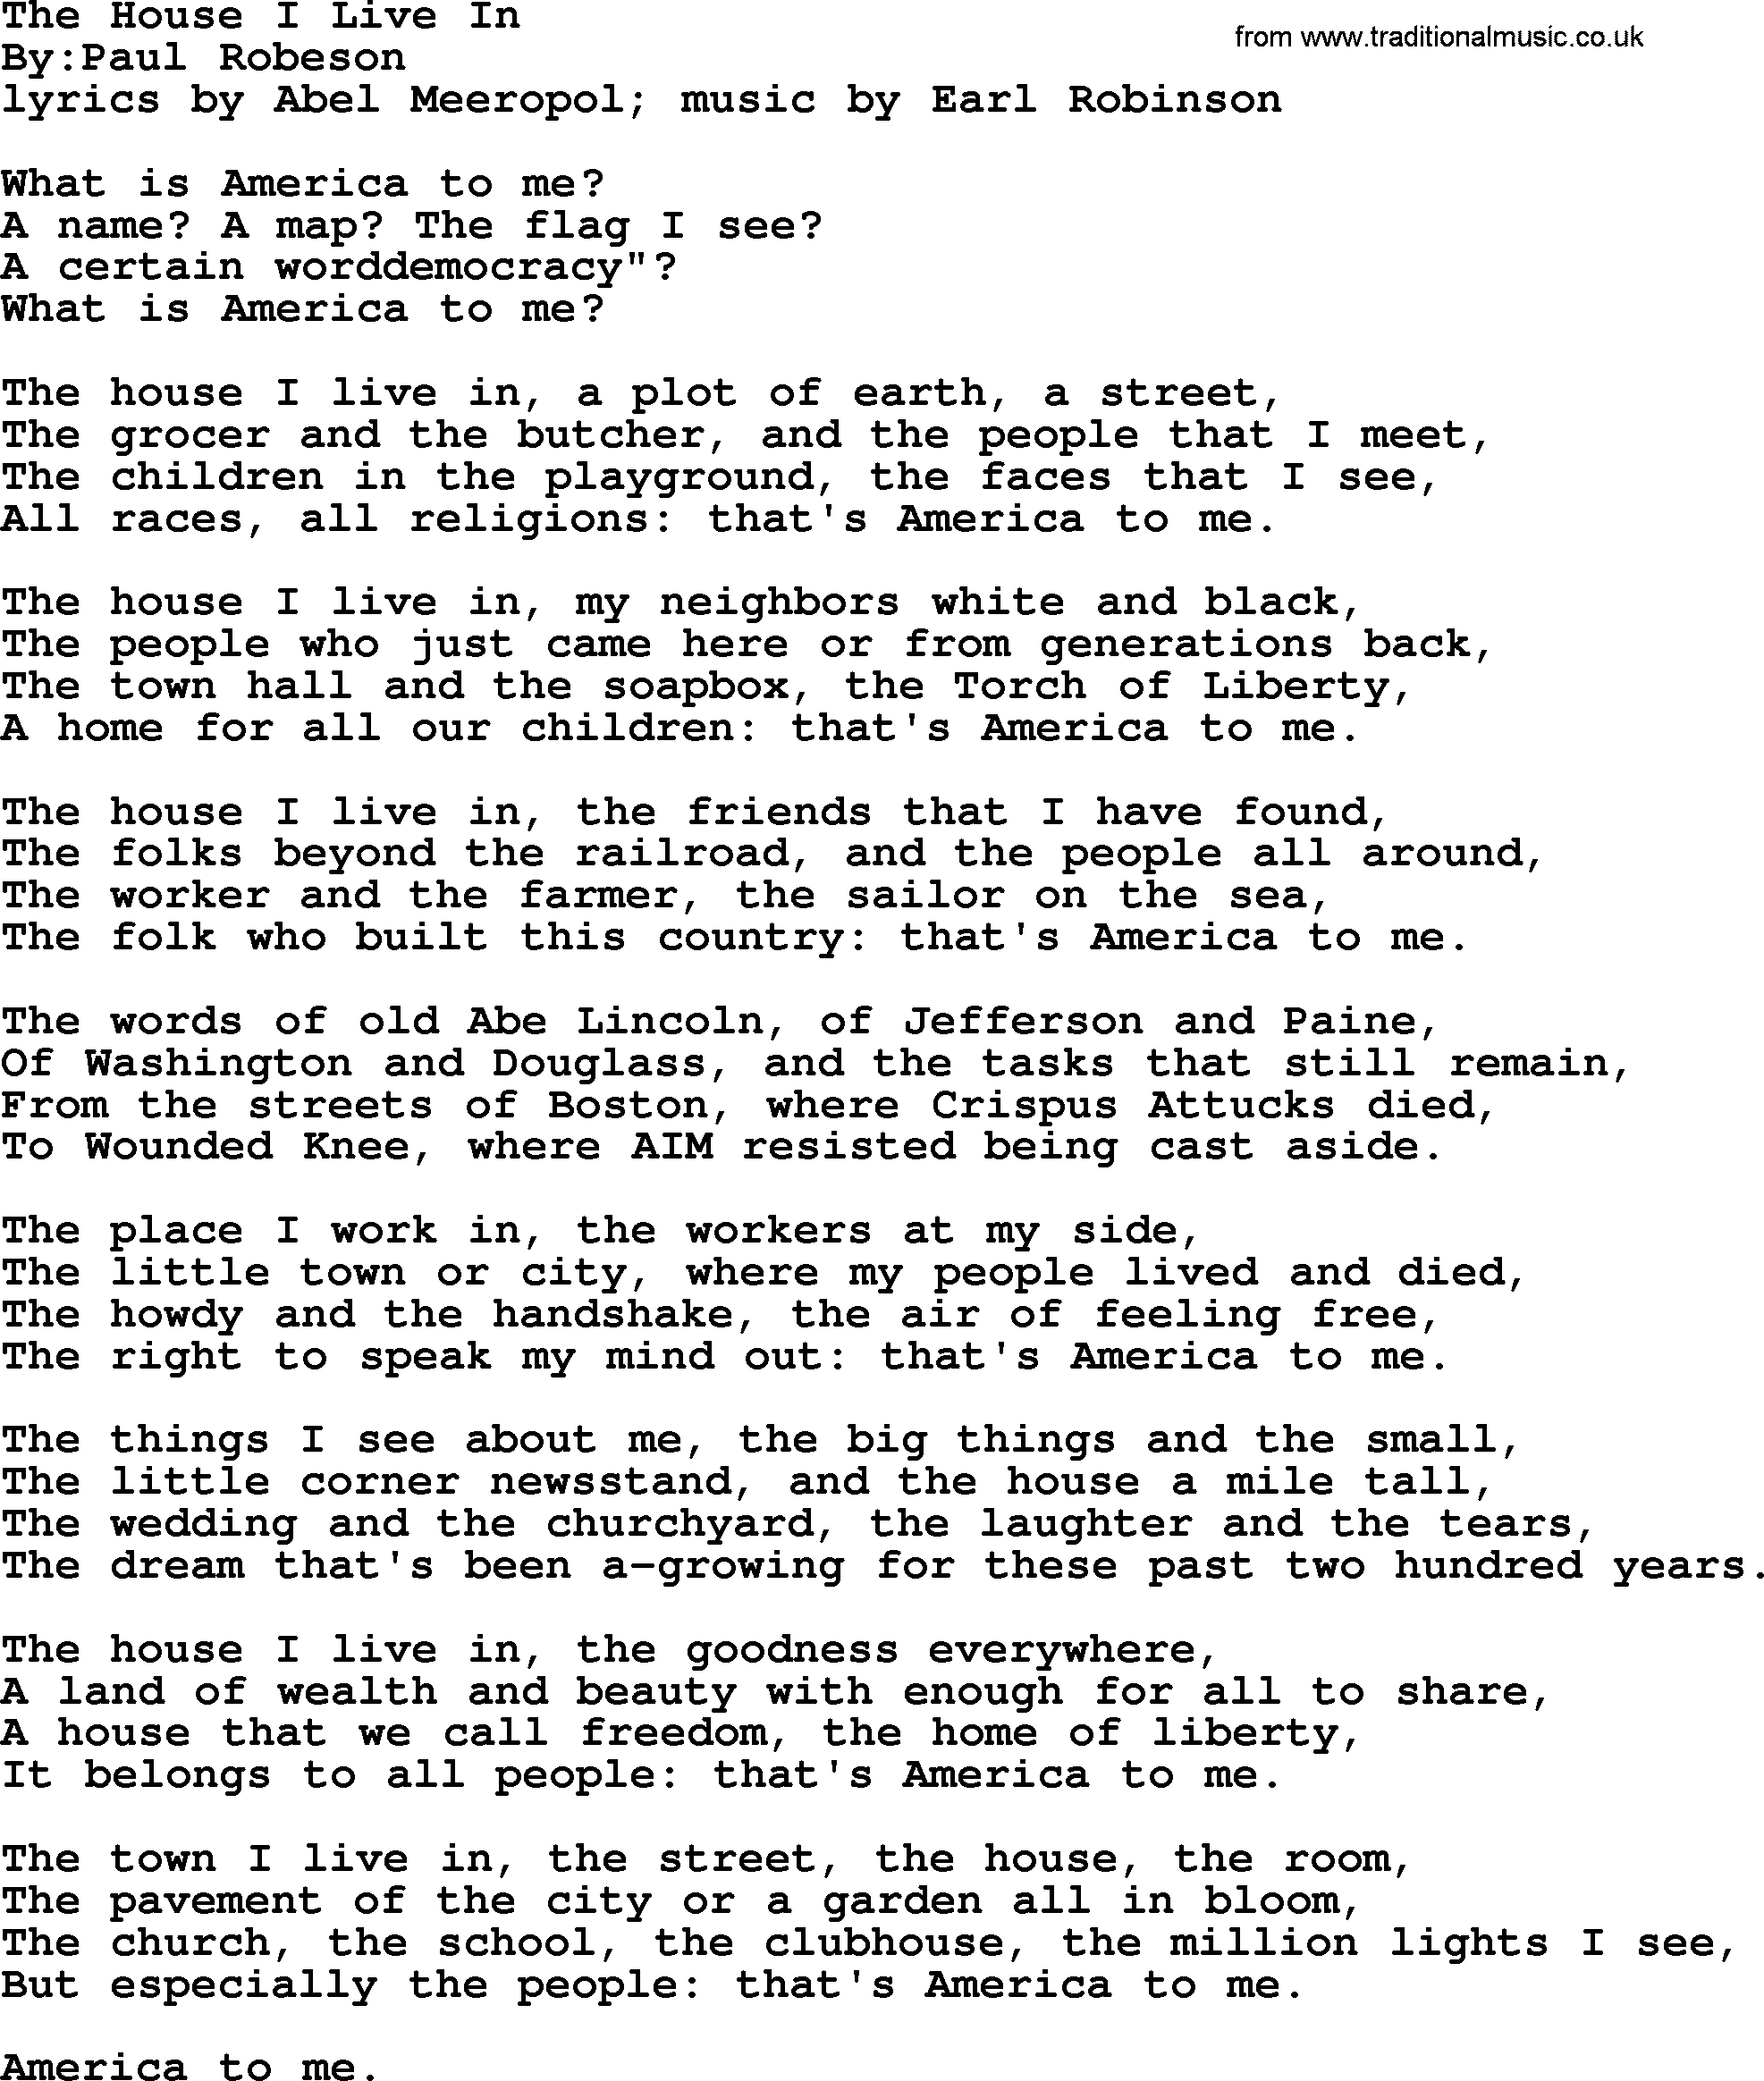 Political, Solidarity, Workers or Union song: The House I Live In, lyrics